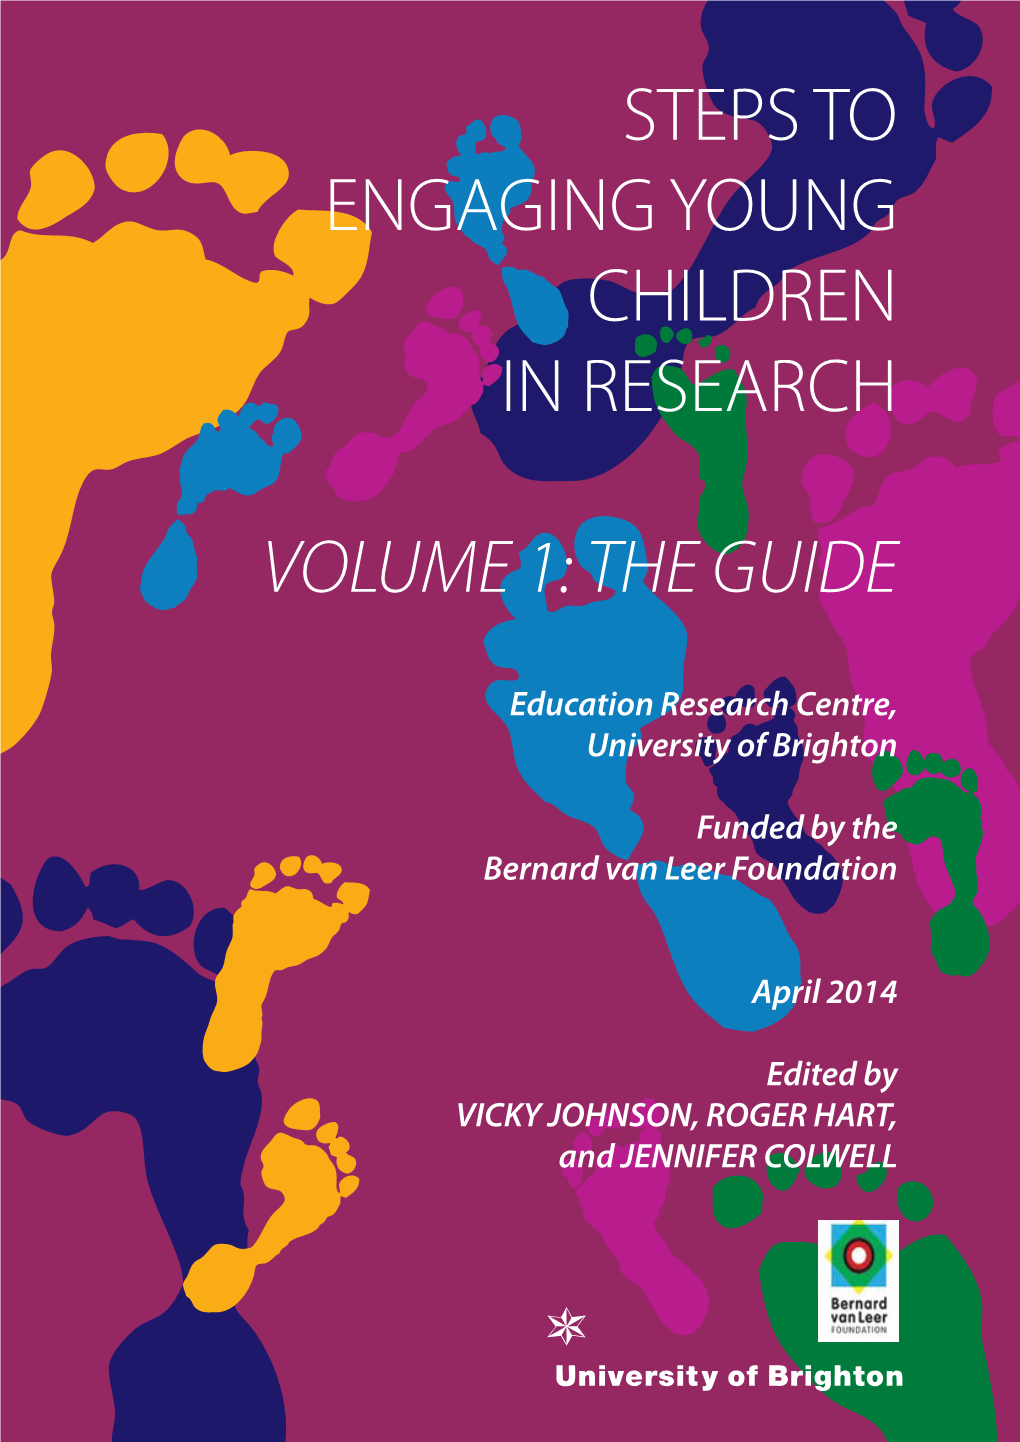 Steps to Engaging Young Children in Research